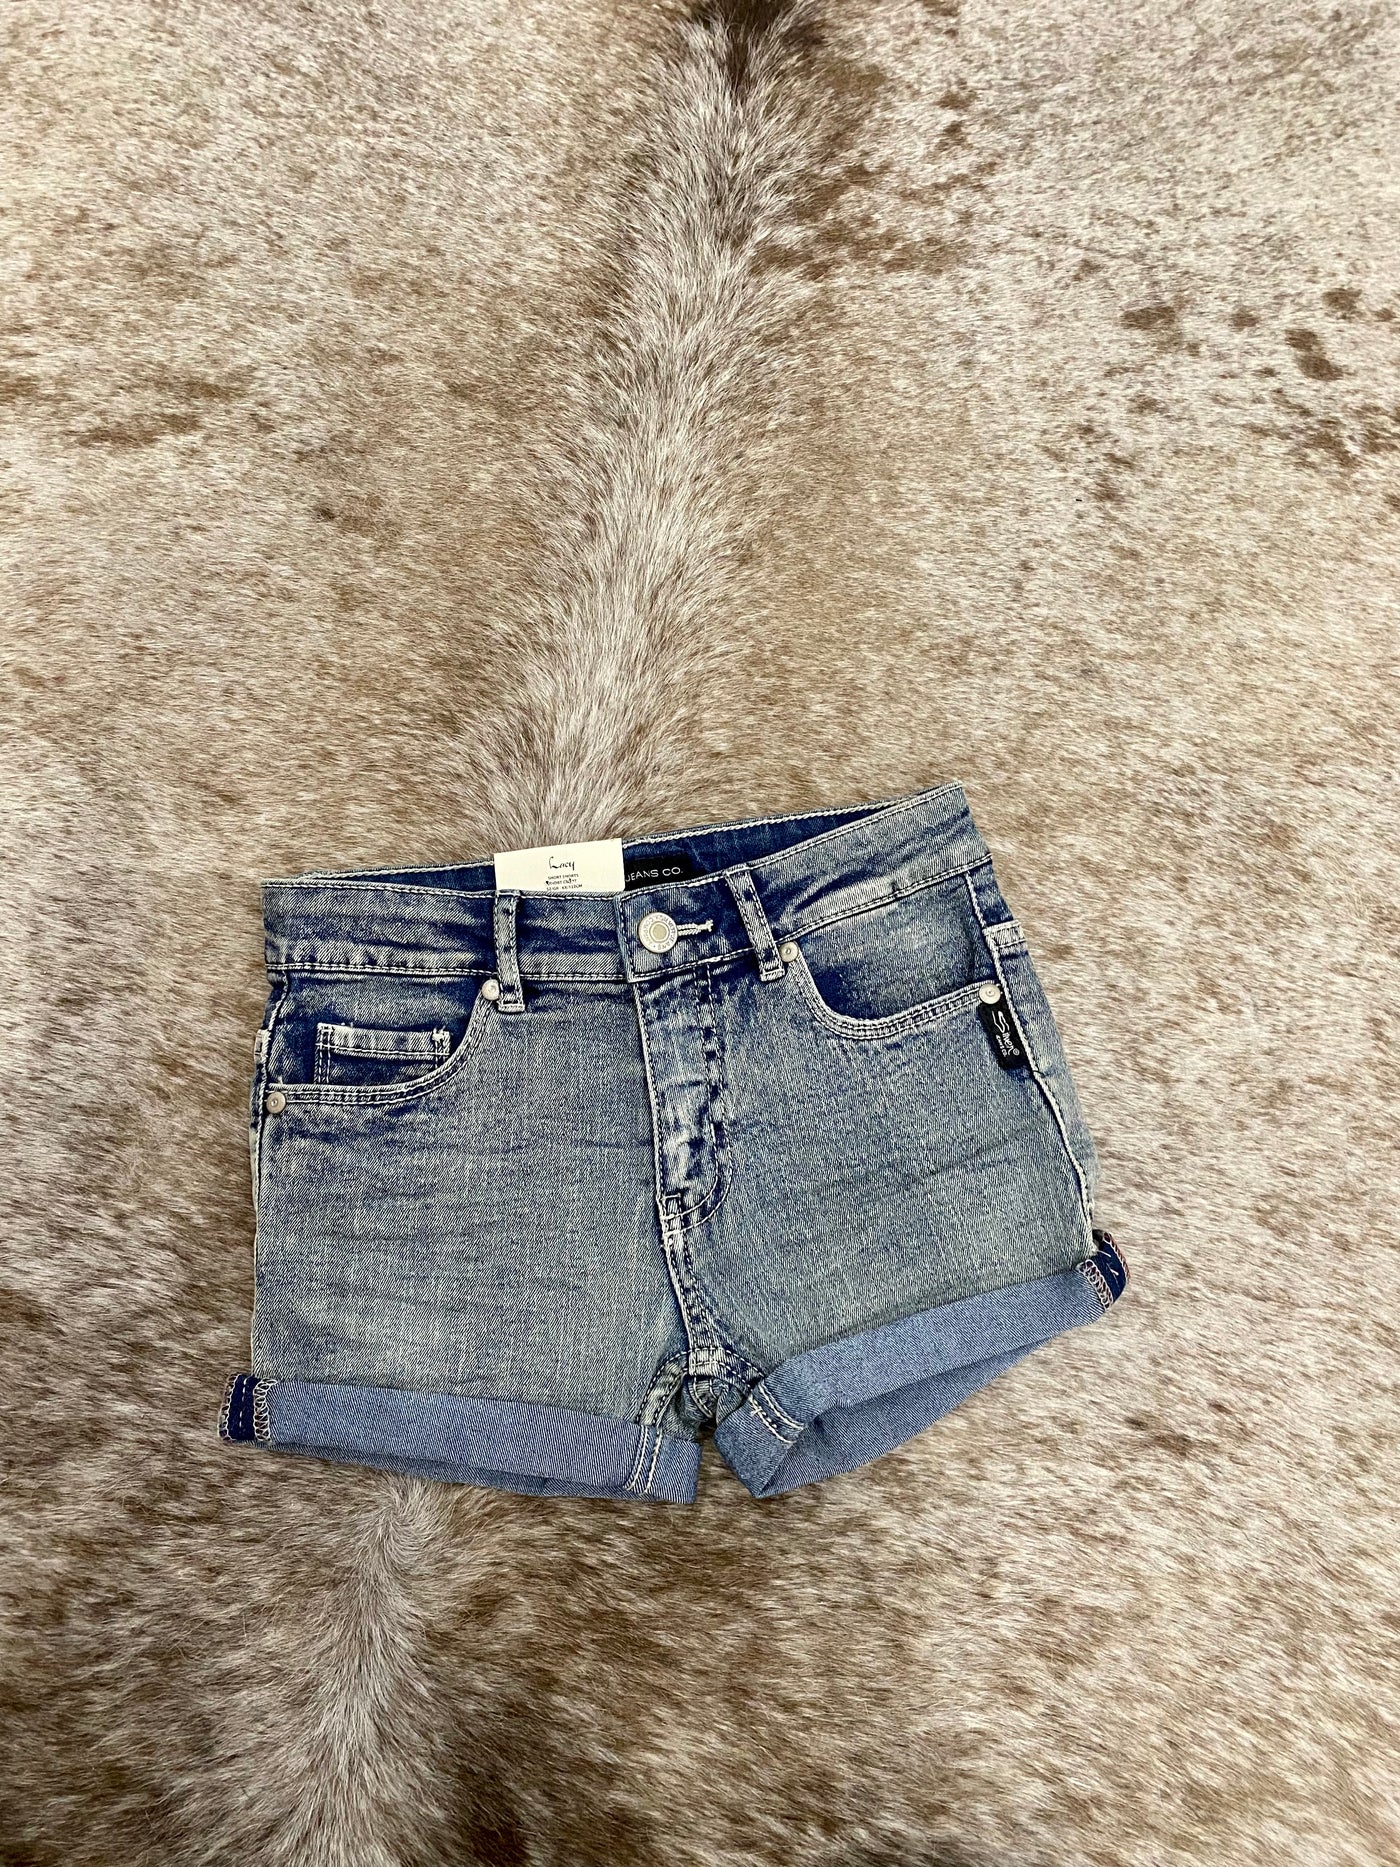 Lacy Girl Denim Bleach Washed Shorts Youth